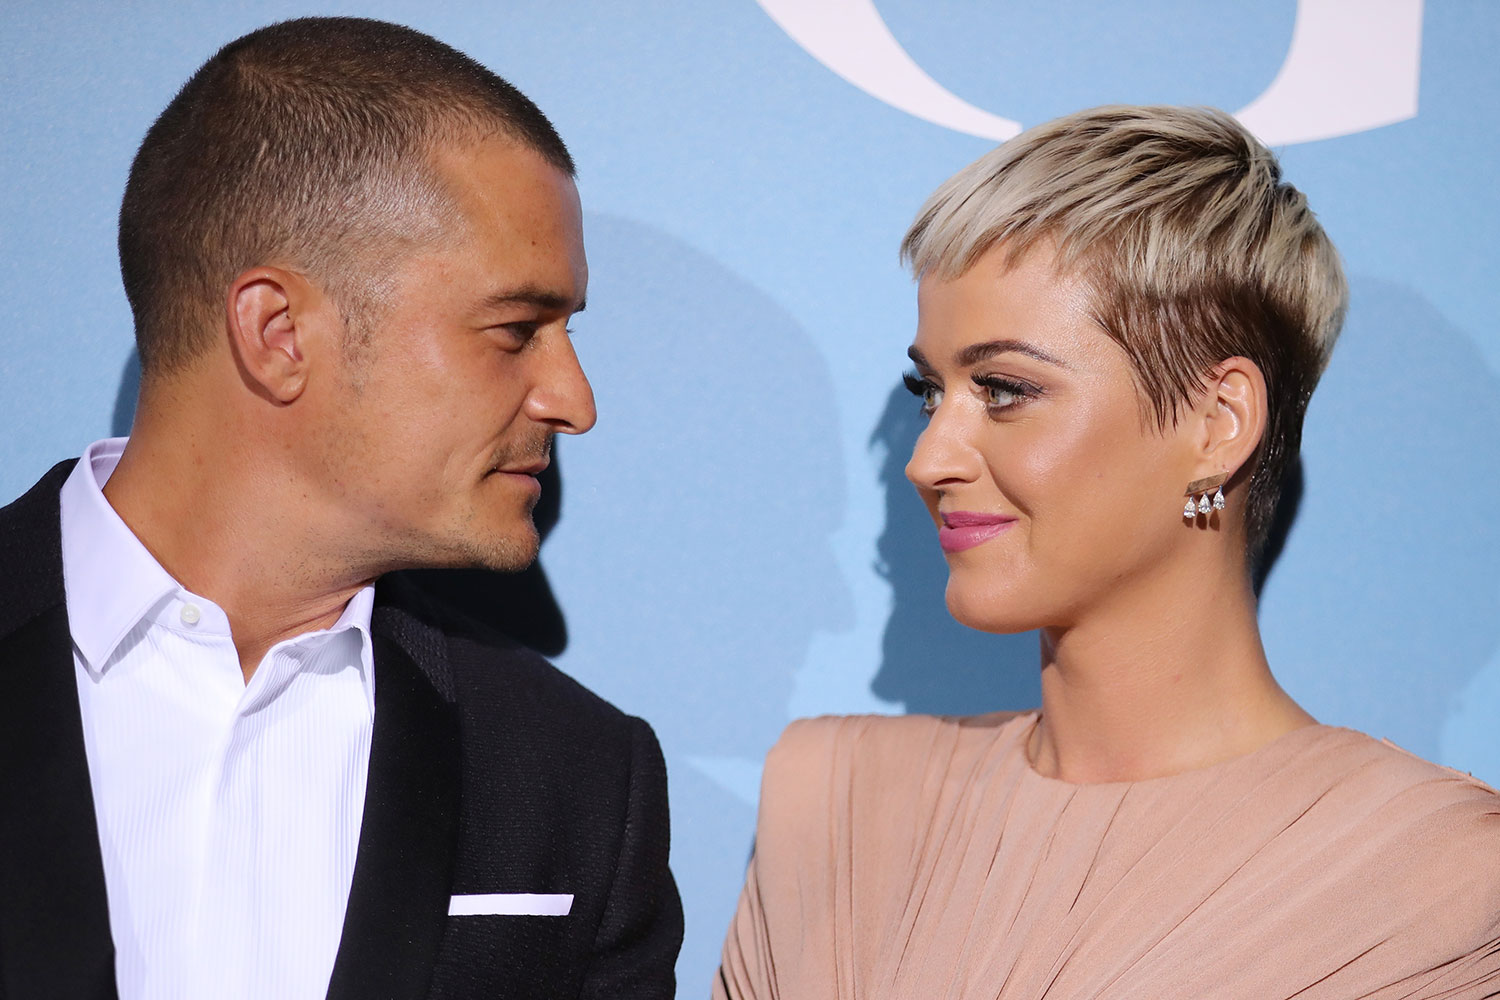 Katy Perry And Orlando Bloom Make Their Relationship Red Carpet Official